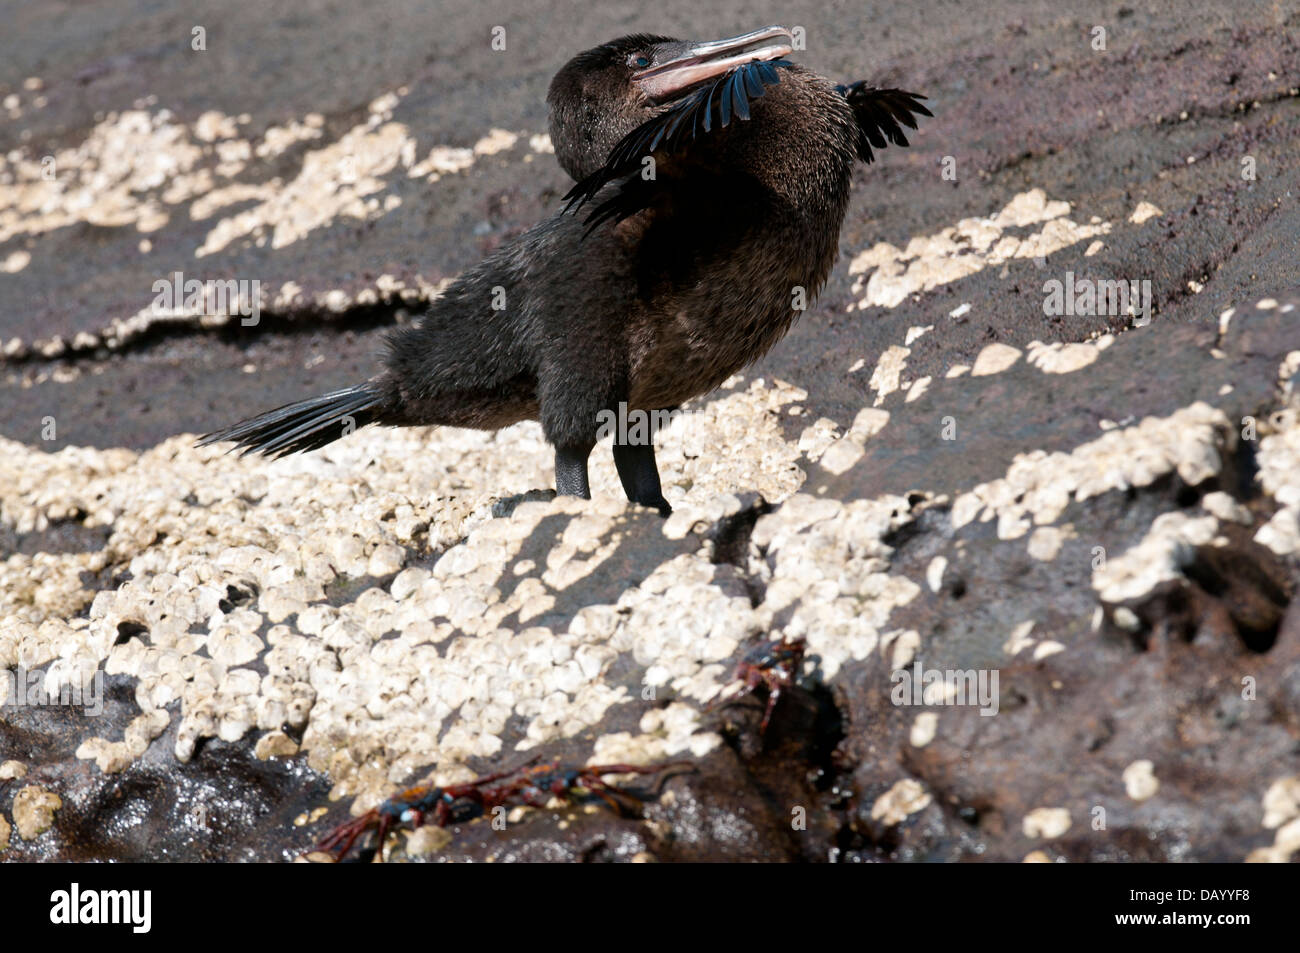 Stock photo of a flightless cormorant displaying his small wings. Stock Photo